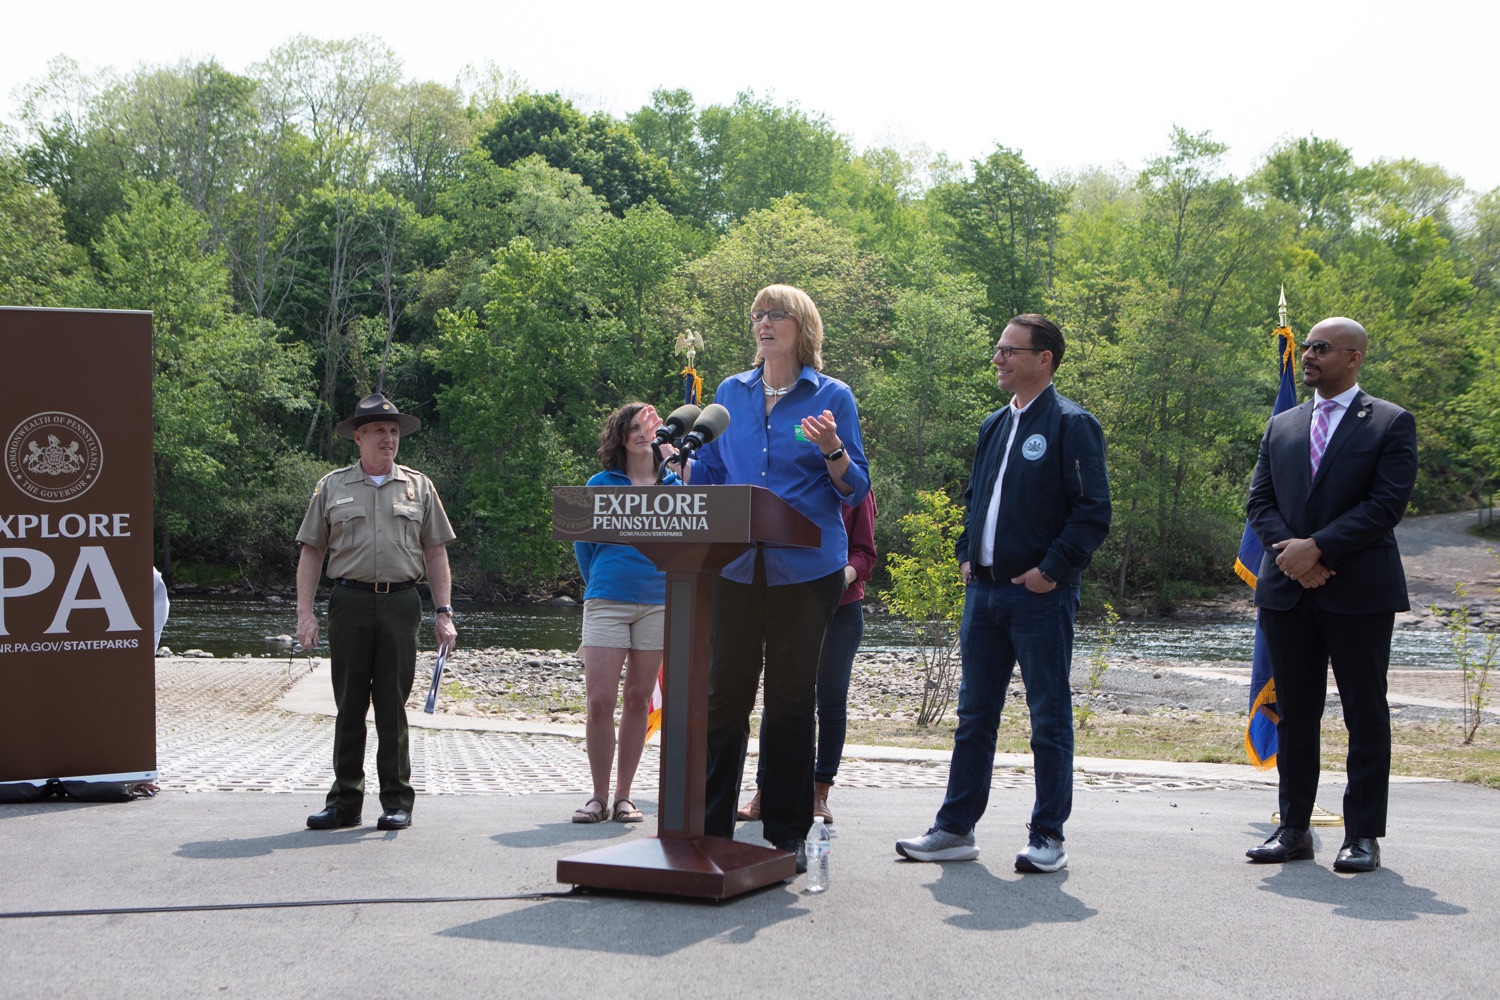 Cindy Adams, Secretary of DCNR, joined Governor Josh Shapiro in visiting Lehigh Gorge State Park in Luzerne County to open a new park access point and highlight his budget's proposed investments in state parks, forests, and trails to make them safe and accessible for every Pennsylvanian.. .In March, the Governor unveiled his commonsense budget proposal filled with solutions to the most pressing issues Pennsylvanians face  including investments to make Pennsylvania communities safer and healthier, grow the economy, safeguard the environment, and support local businesses. . ."It's moments like these where we're celebrating wonderful infrastructure like this that have been a bit too rare over the last three decades," said Secretary of the Pennsylvania Department of Conservation and Natural Resources Cindy Dunn. "The public lands and parks of Pennsylvania need to make people feel safe and welcome. Governor Shapiro understands and grasps the advantage that we have in Pennsylvania with these wonderful natural assets and how to bring them to bear to even serve the public of Pennsylvania." .<br><a href="https://filesource.amperwave.net/commonwealthofpa/photo/23155_GOV_LehighGorge_ERD_033.jpg" target="_blank">⇣ Download Photo</a>